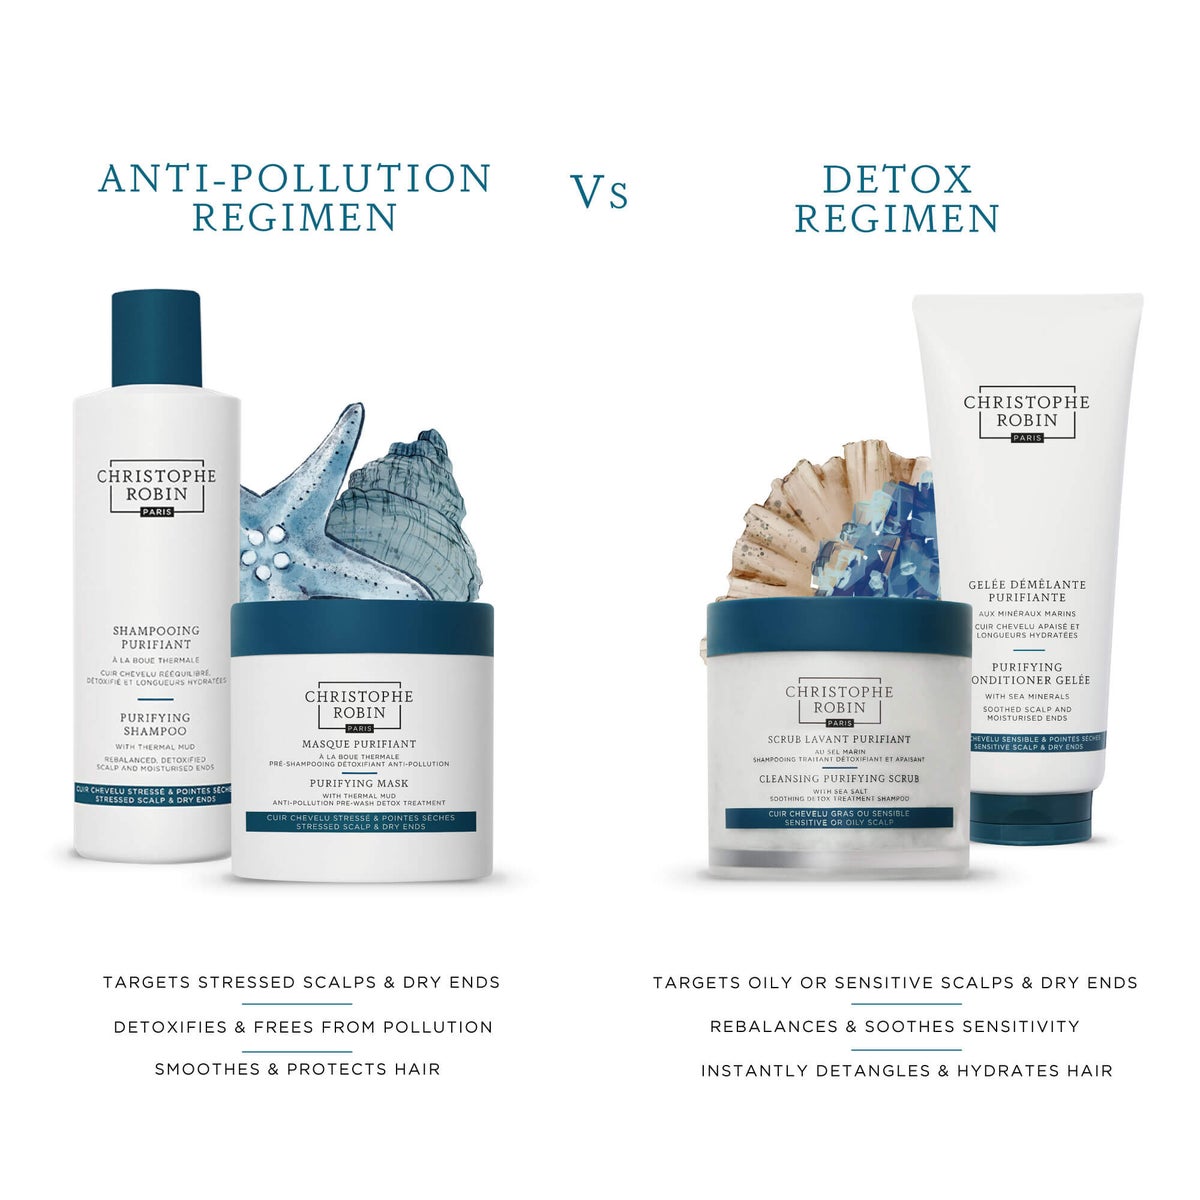 DISCOVER THE PURIFYING REGIMEN